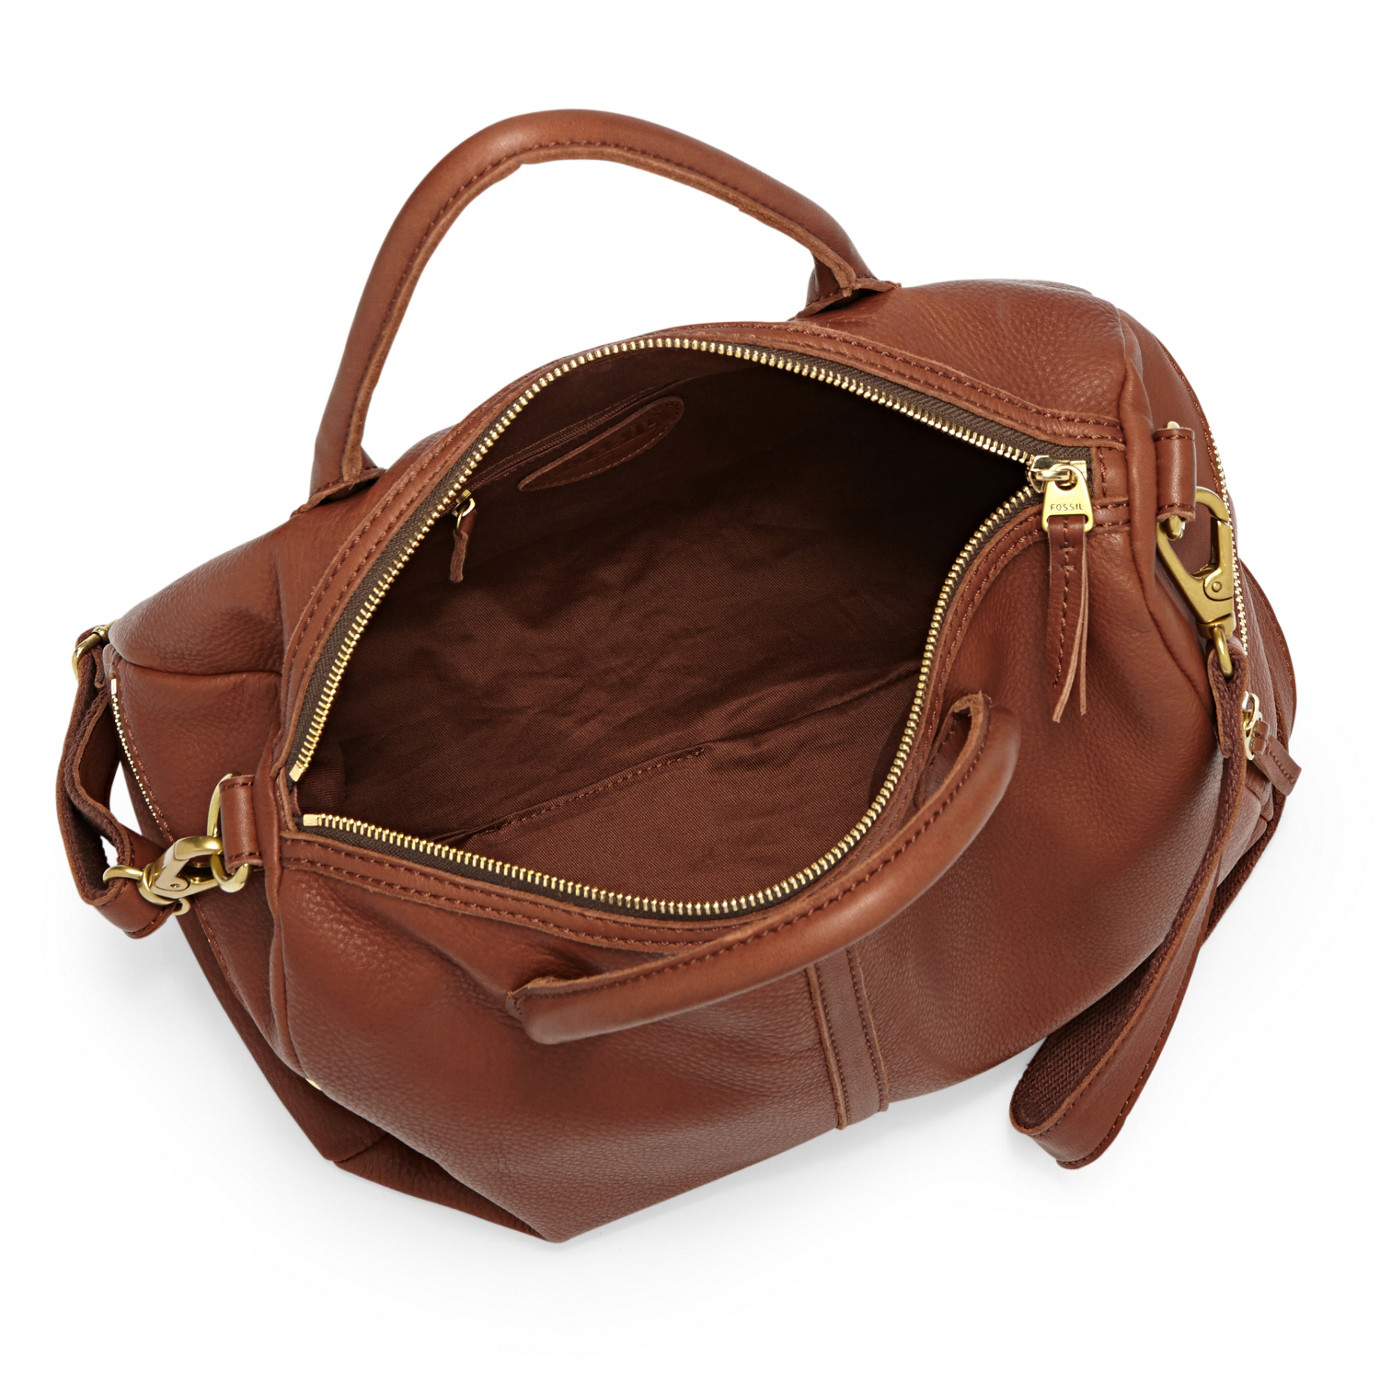 USA Boutique: Fossil Erin Satchel - Rich Leather Brown